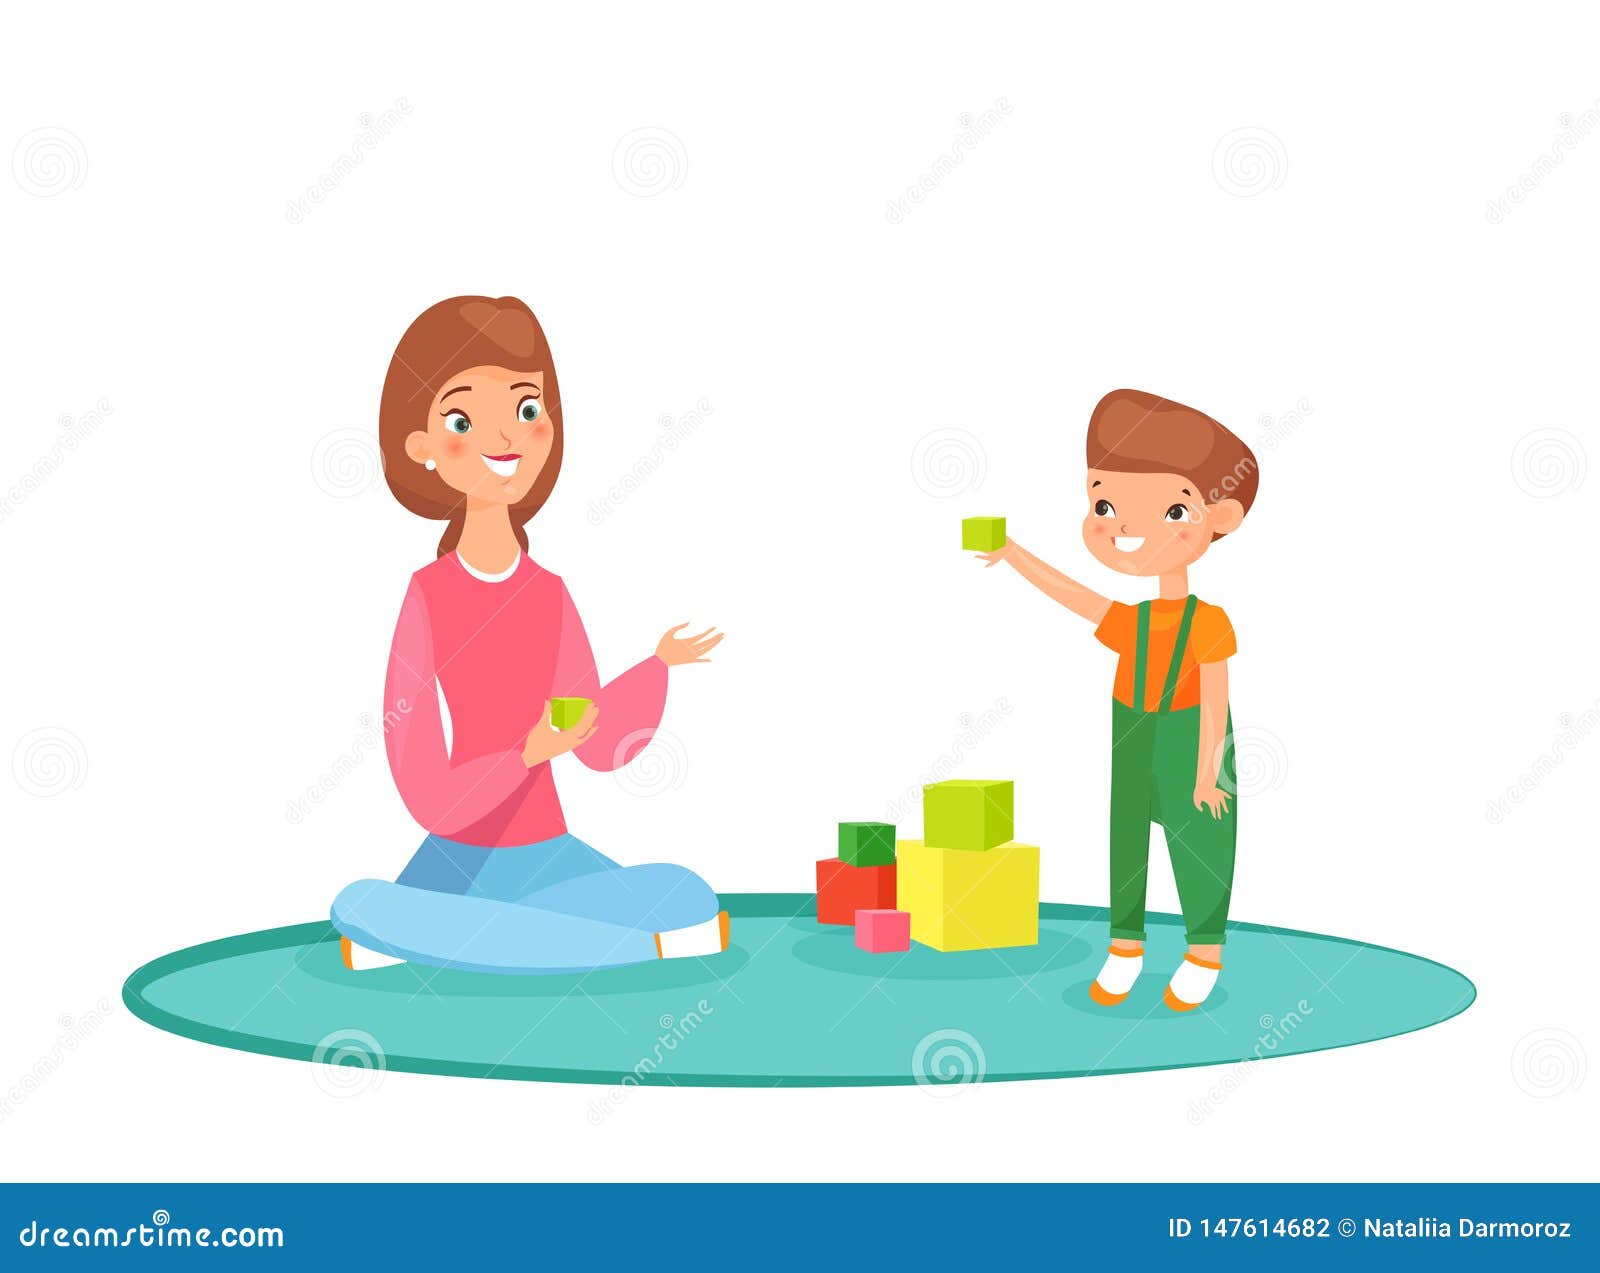 Vector Illustration Of Mom Playing Blocks With Her Son On The Carpet